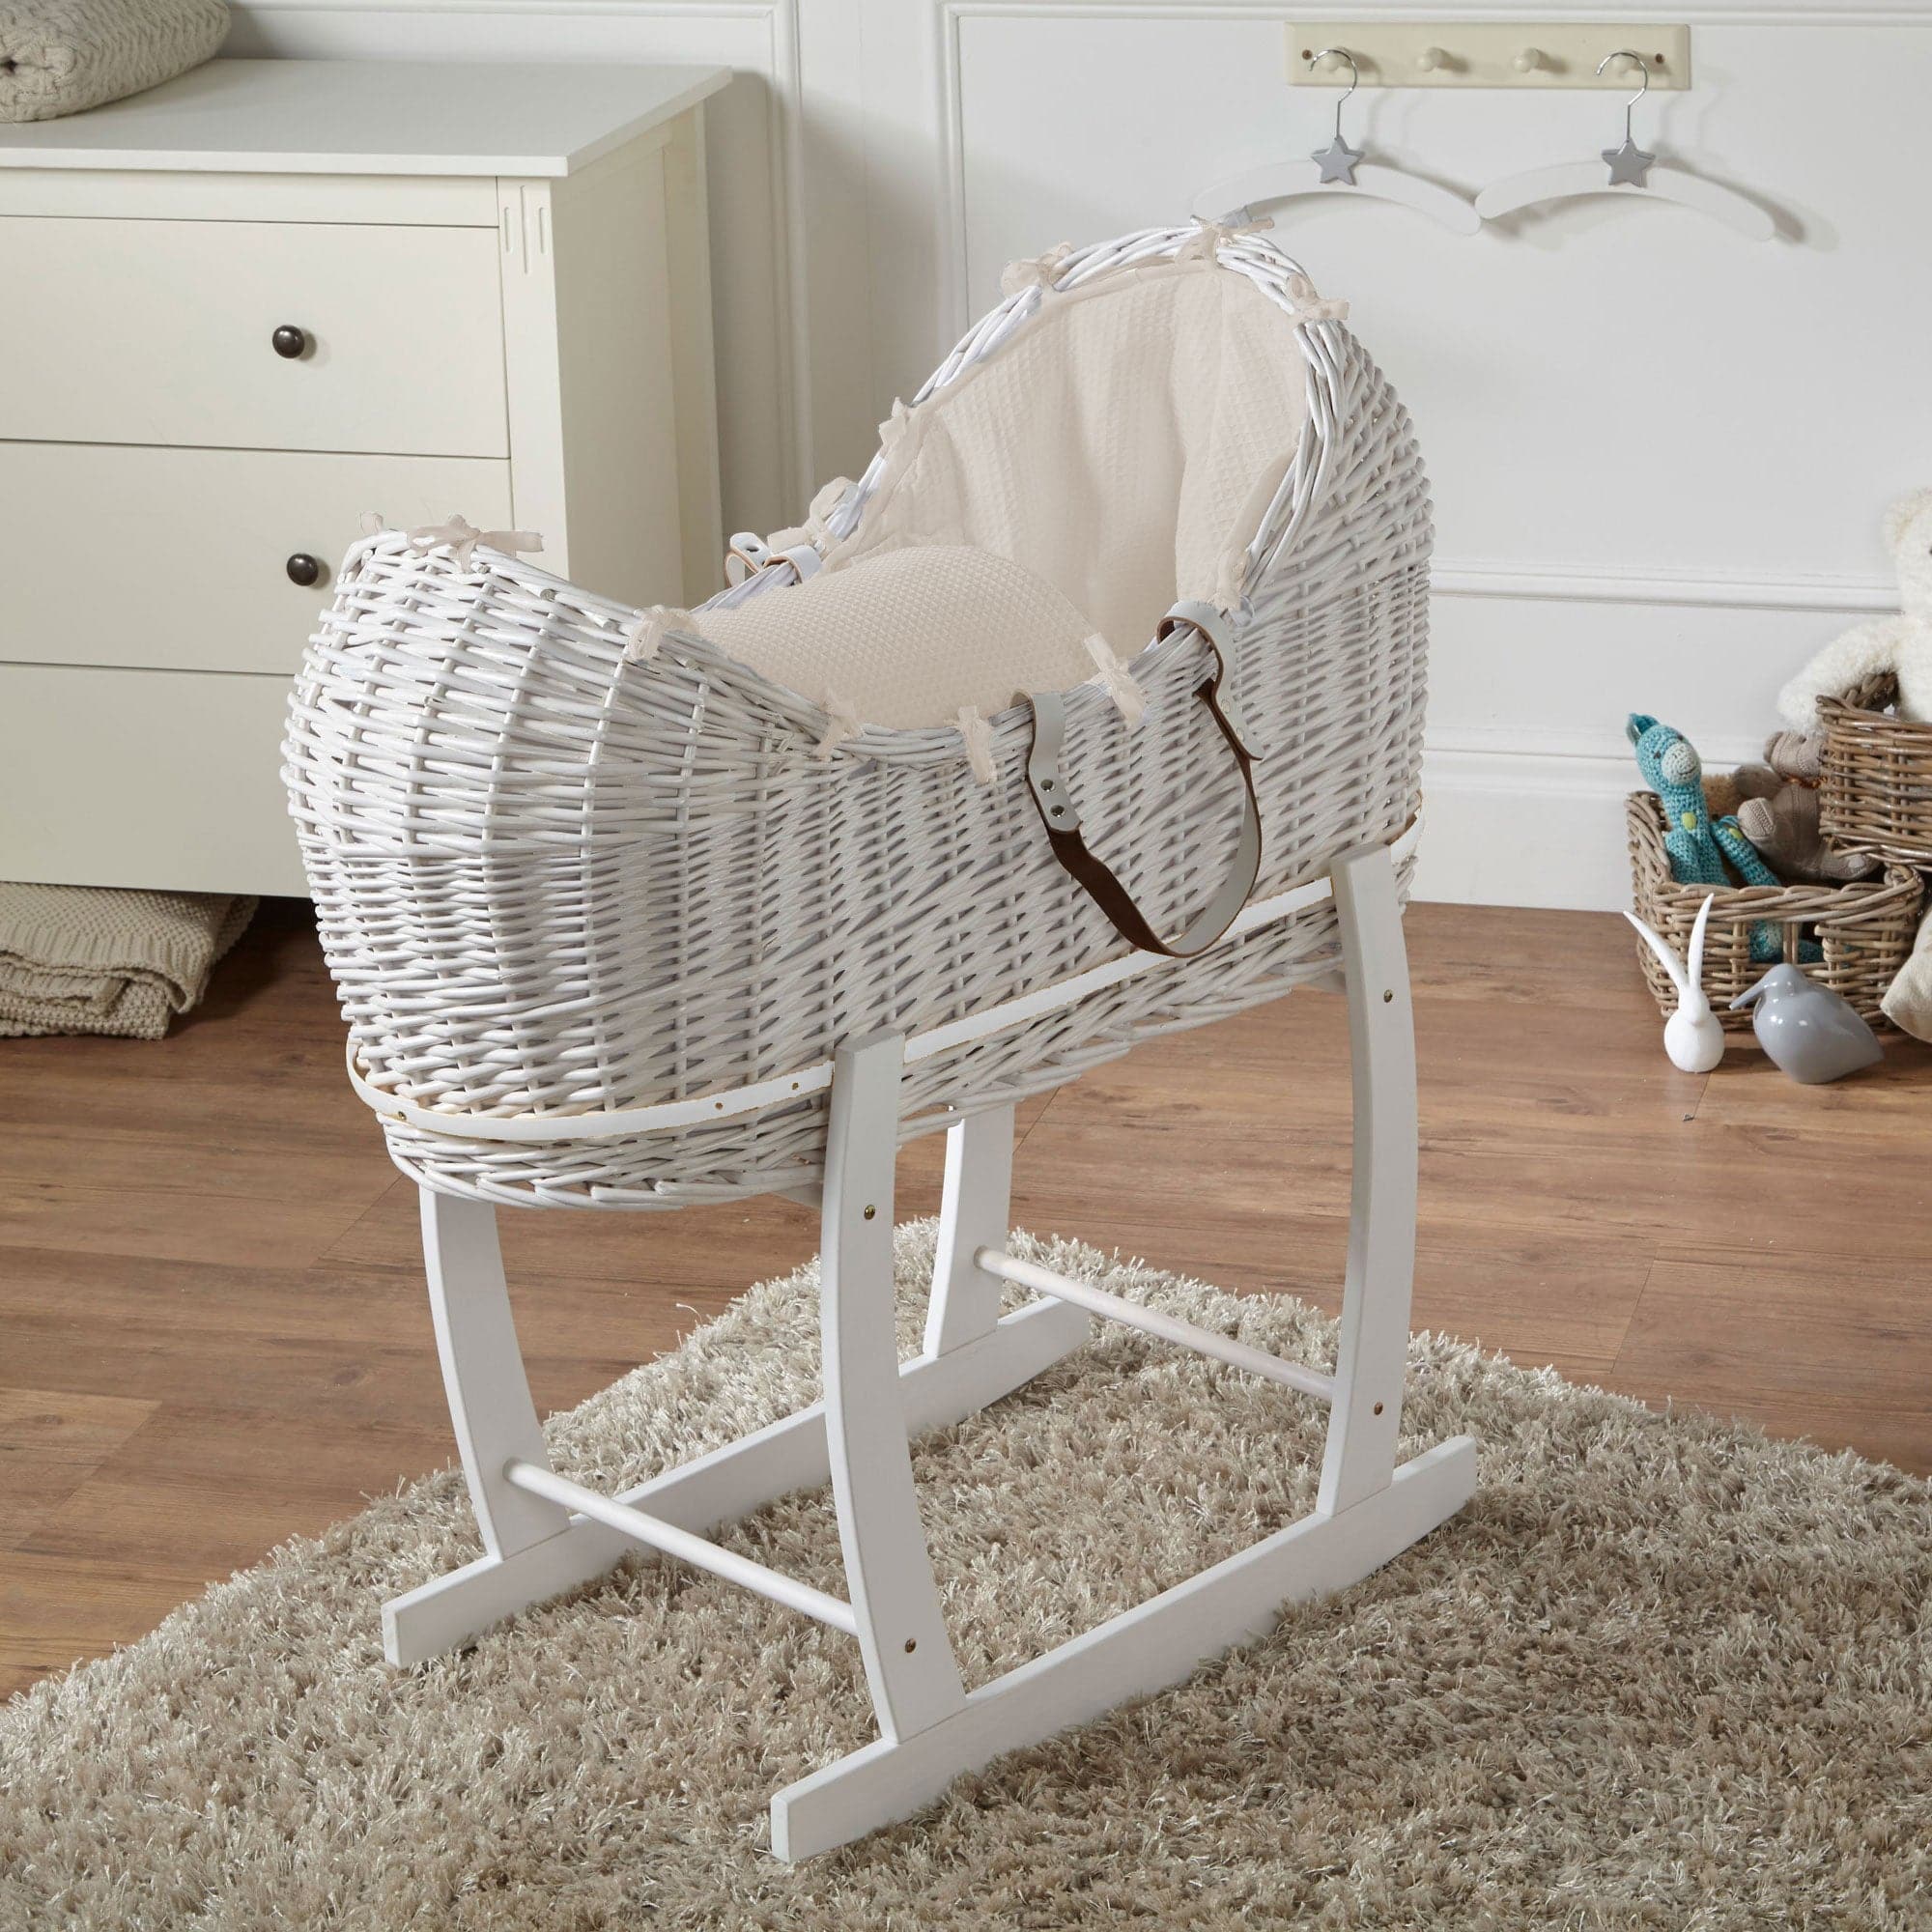 Wicker Deluxe Pod Baby Moses Basket With Stand - White / Waffle / Cream | For Your Little One